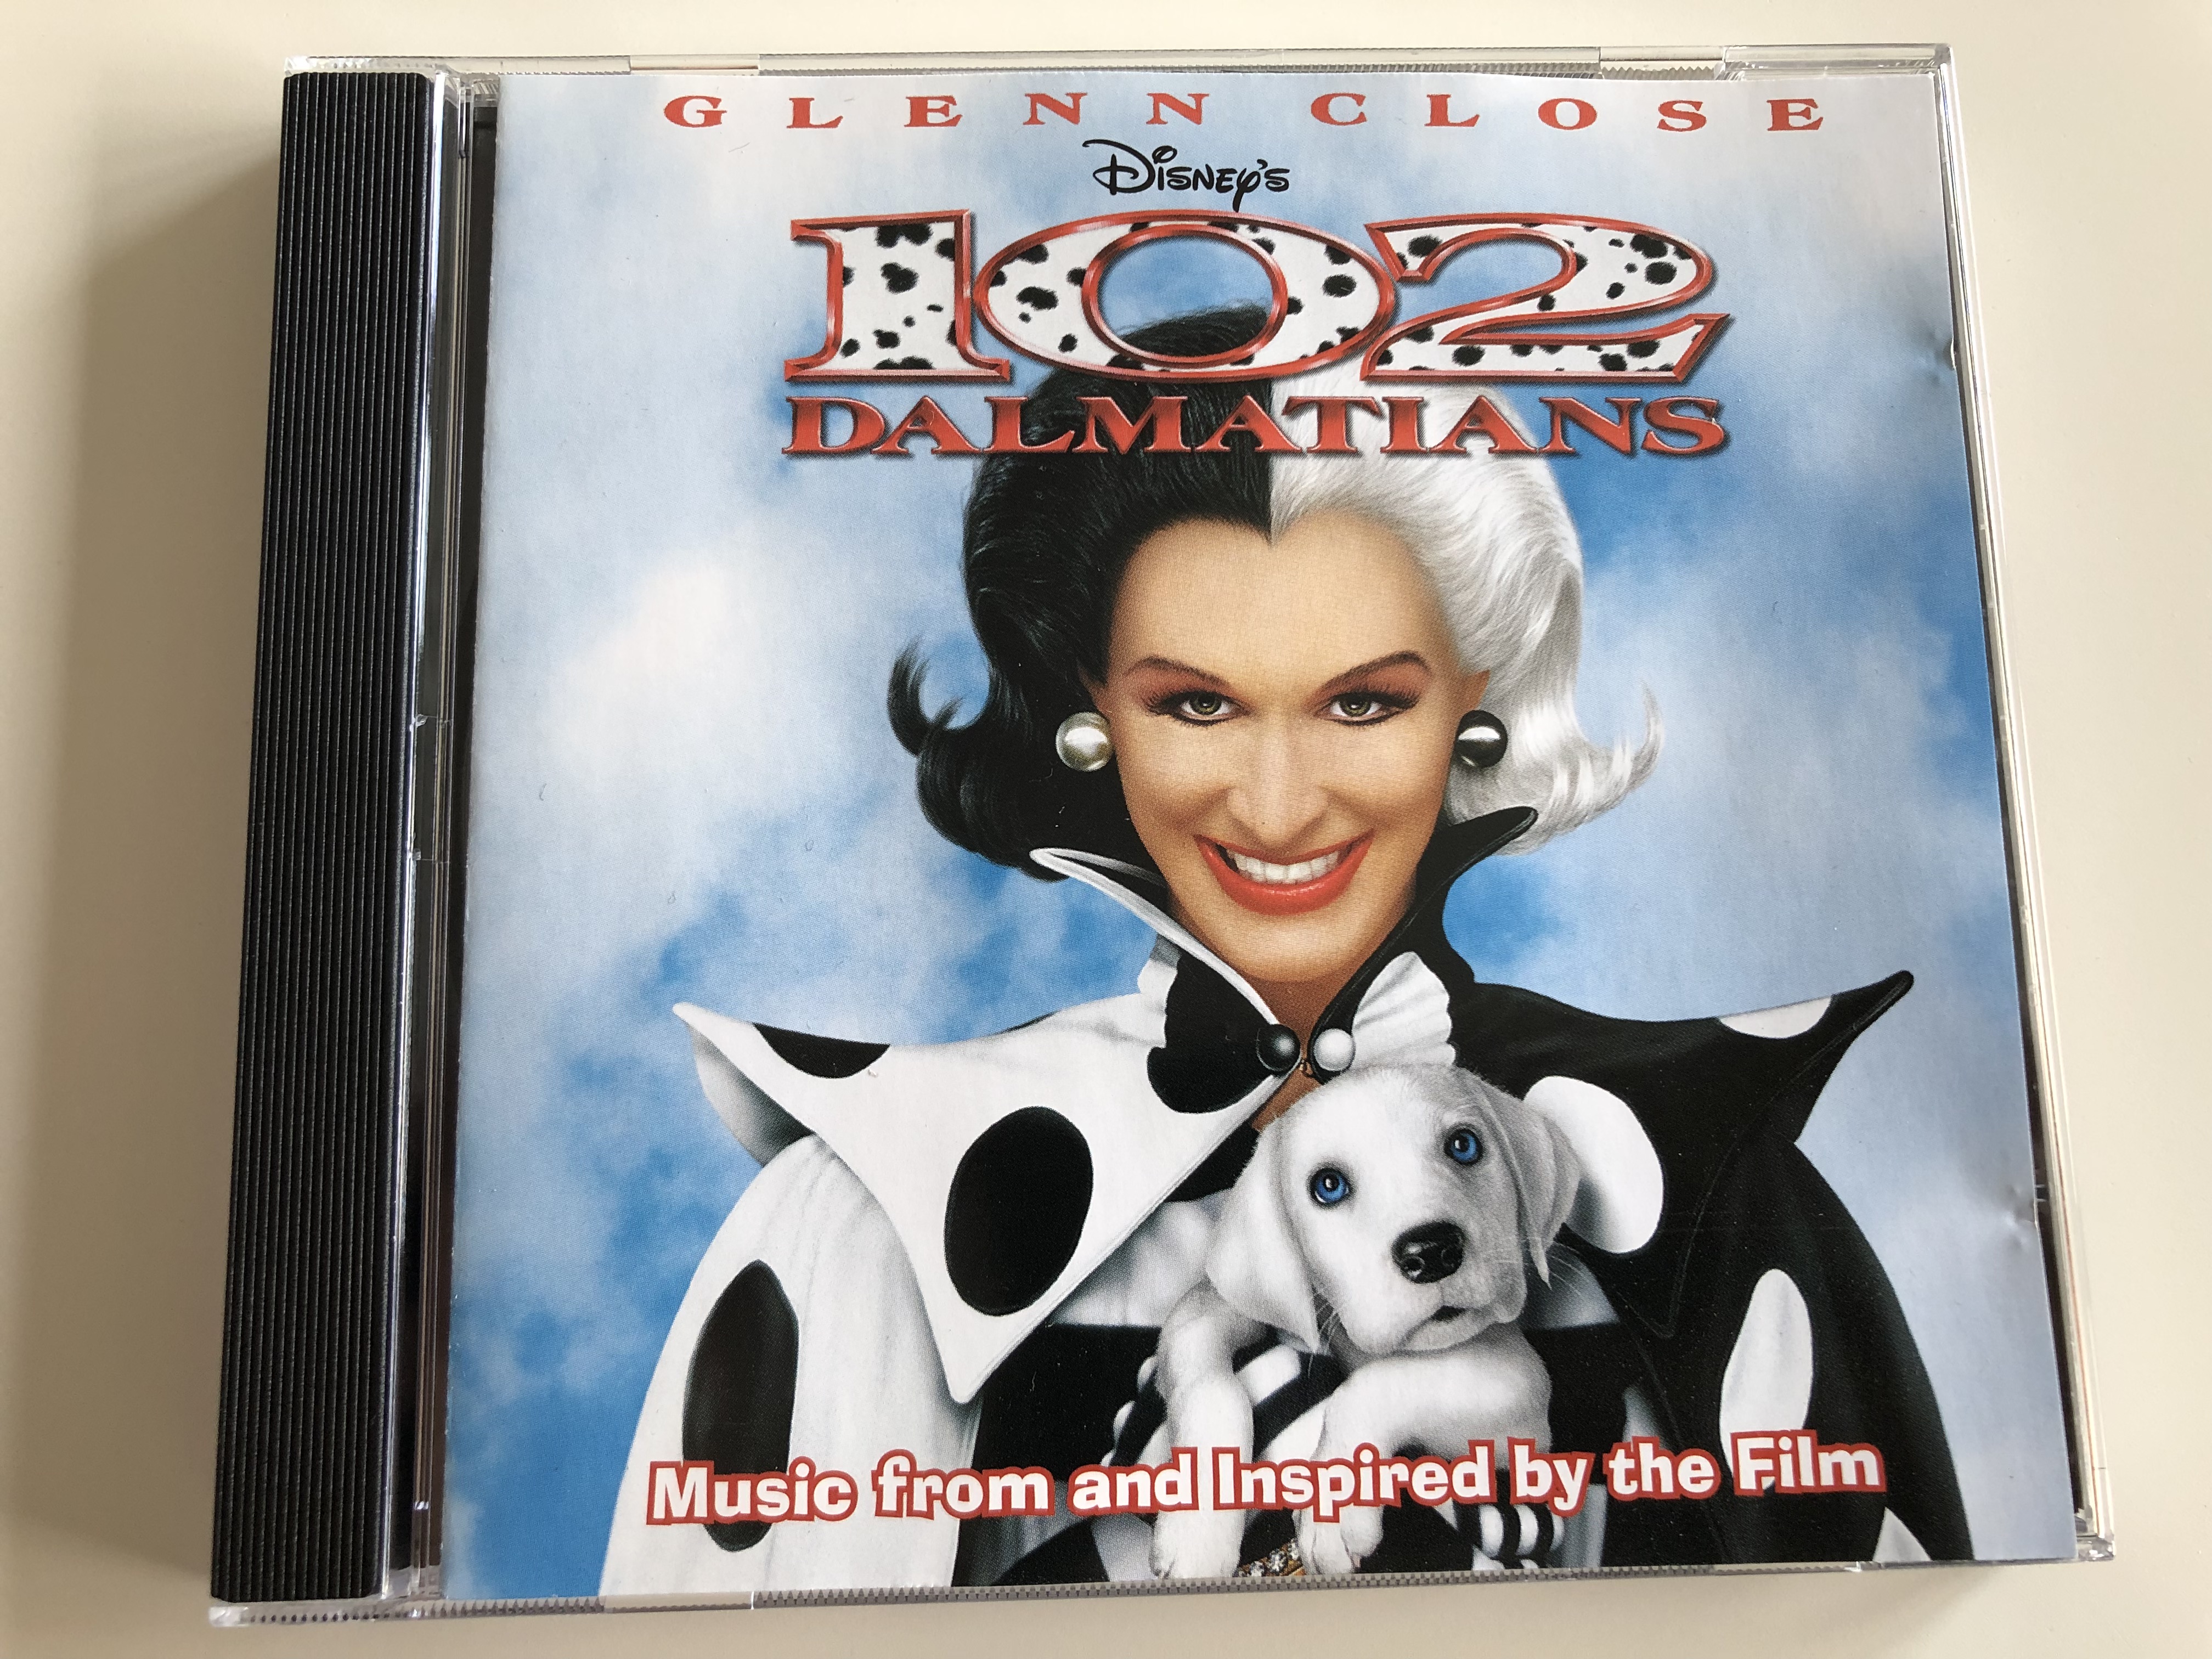 glenn-close-disney-s-102-dalmatians-audio-cd-2000-music-from-and-inspired-by-the-film-edel-records-gmbh-1-.jpg